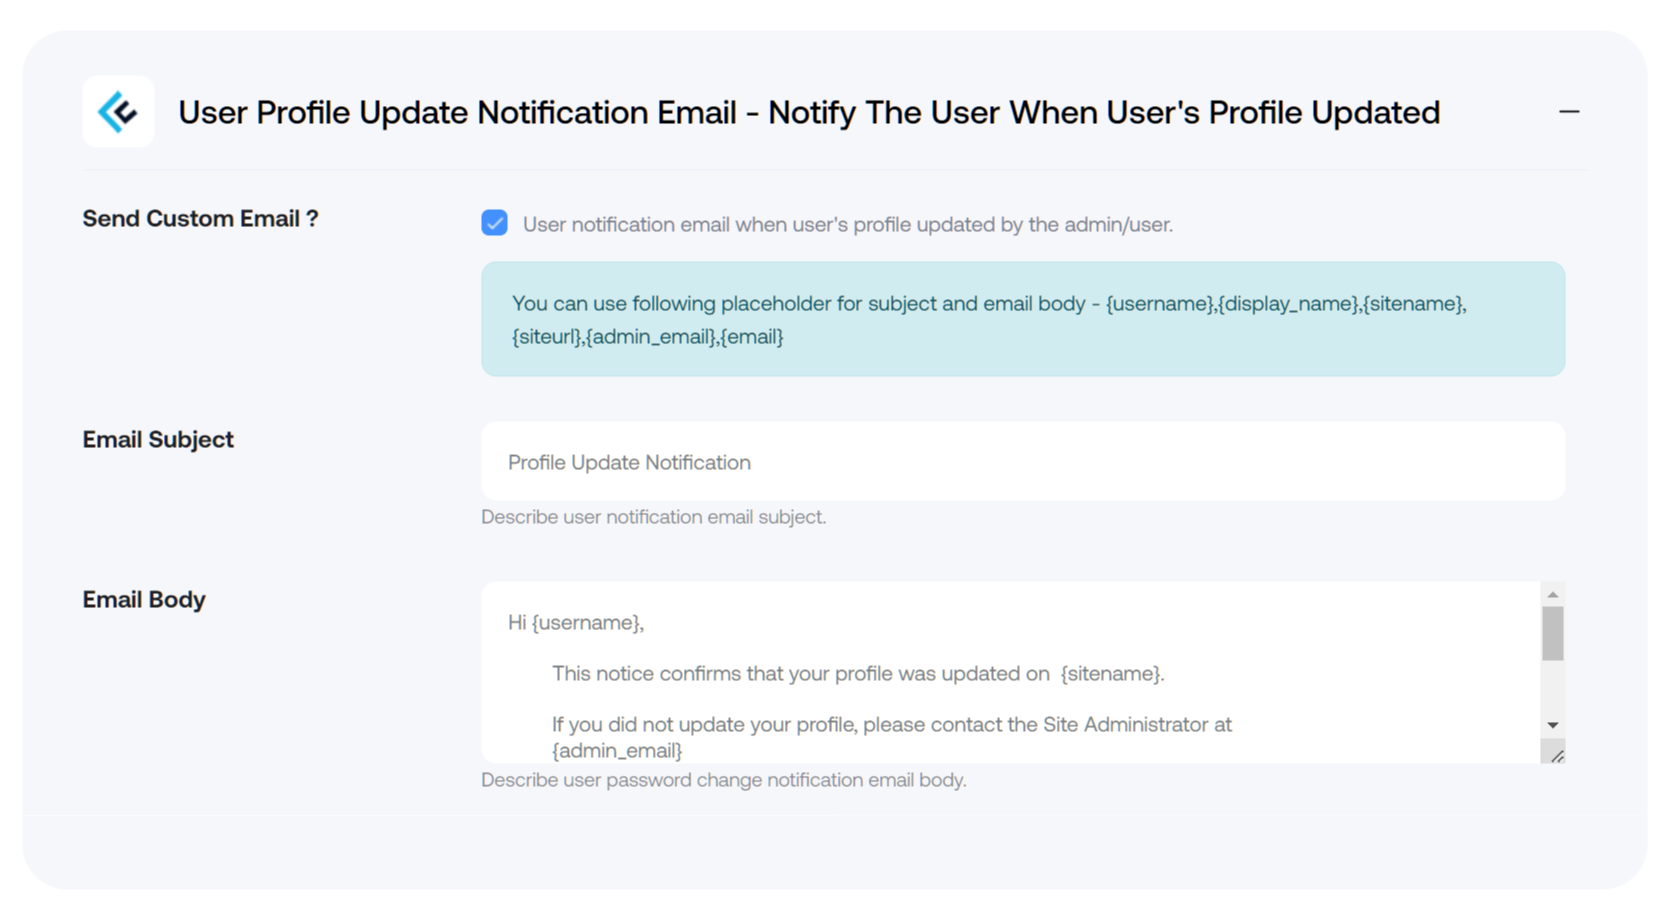 User Profile Update Notification Email - Notify The User When User's Profile Updated